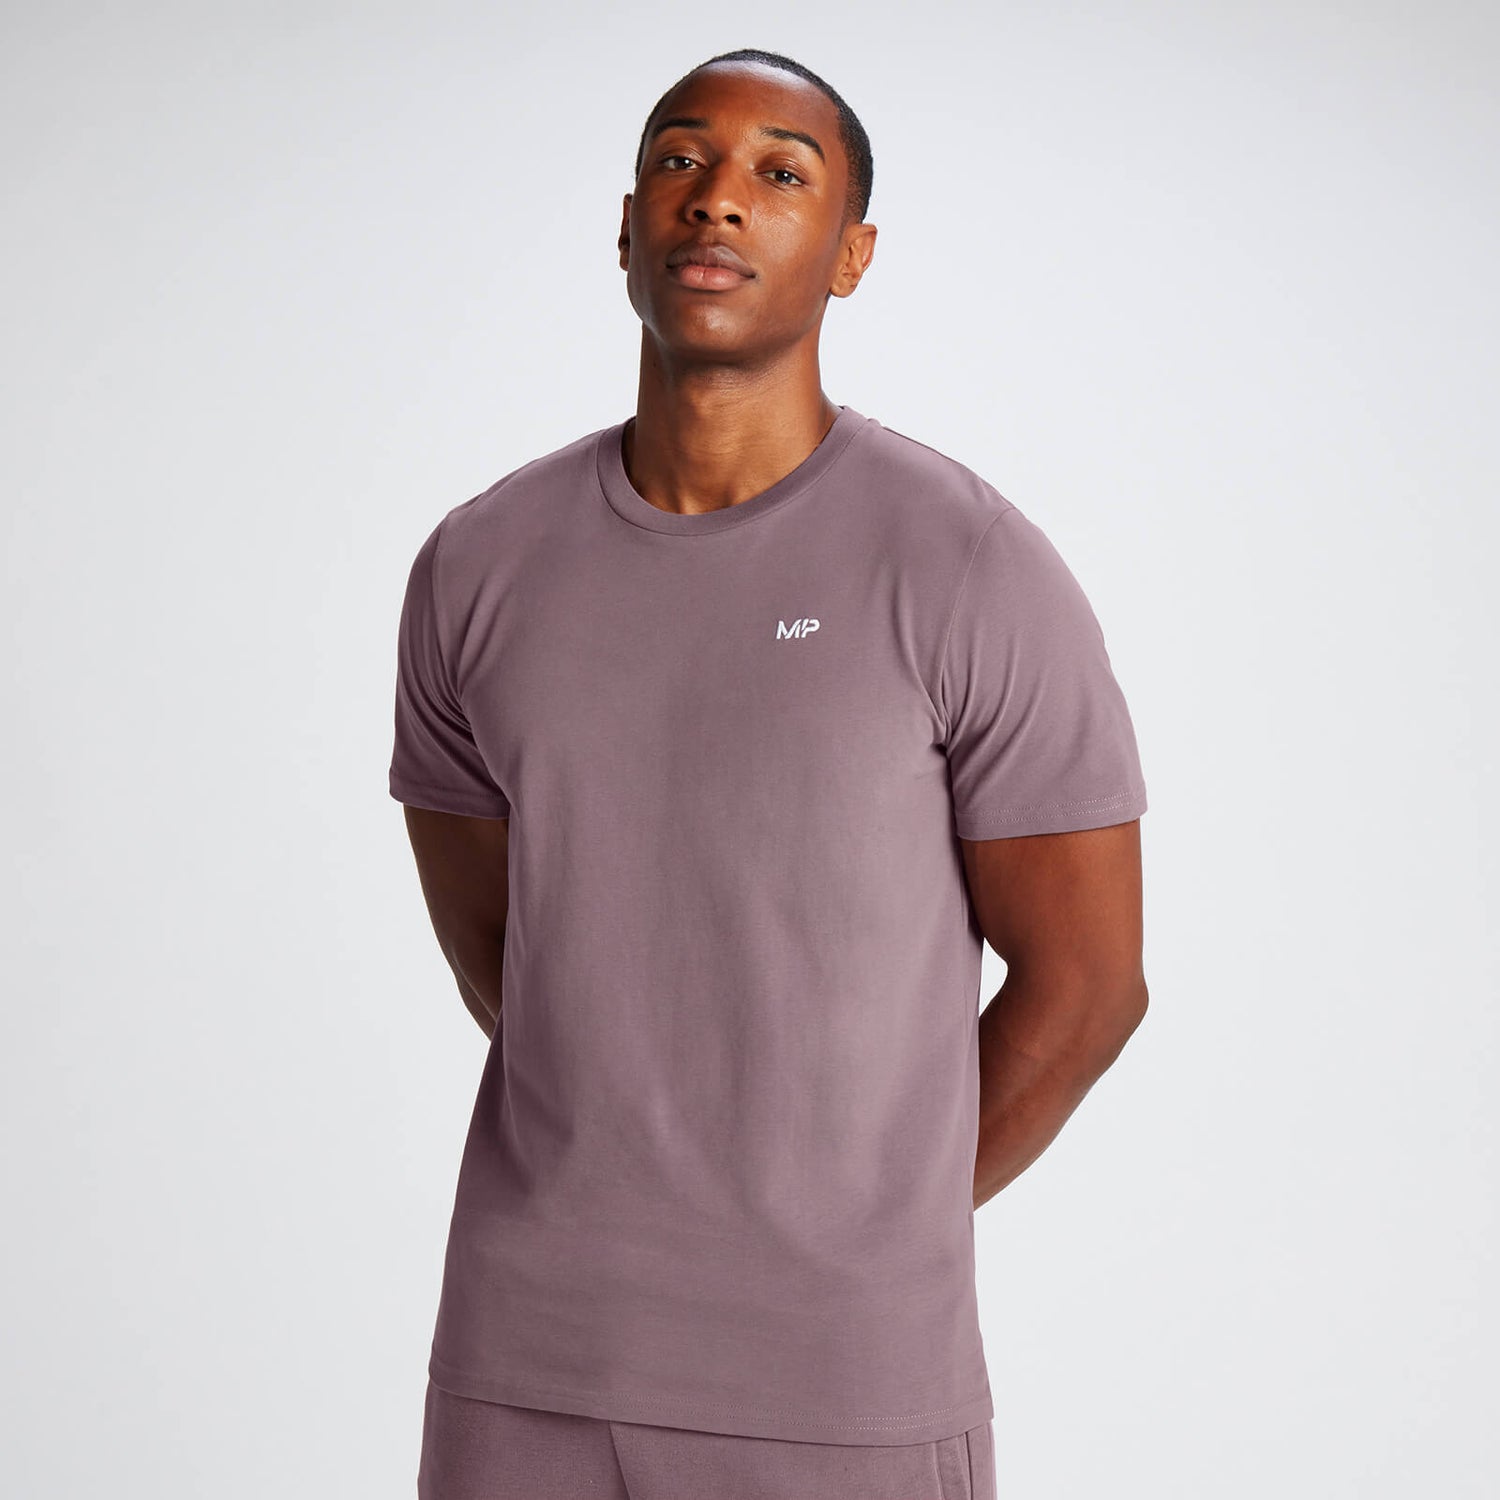 MP Men's Rest Day Oversized T-Shirt - Washed Burgundy | MP™ Apparel